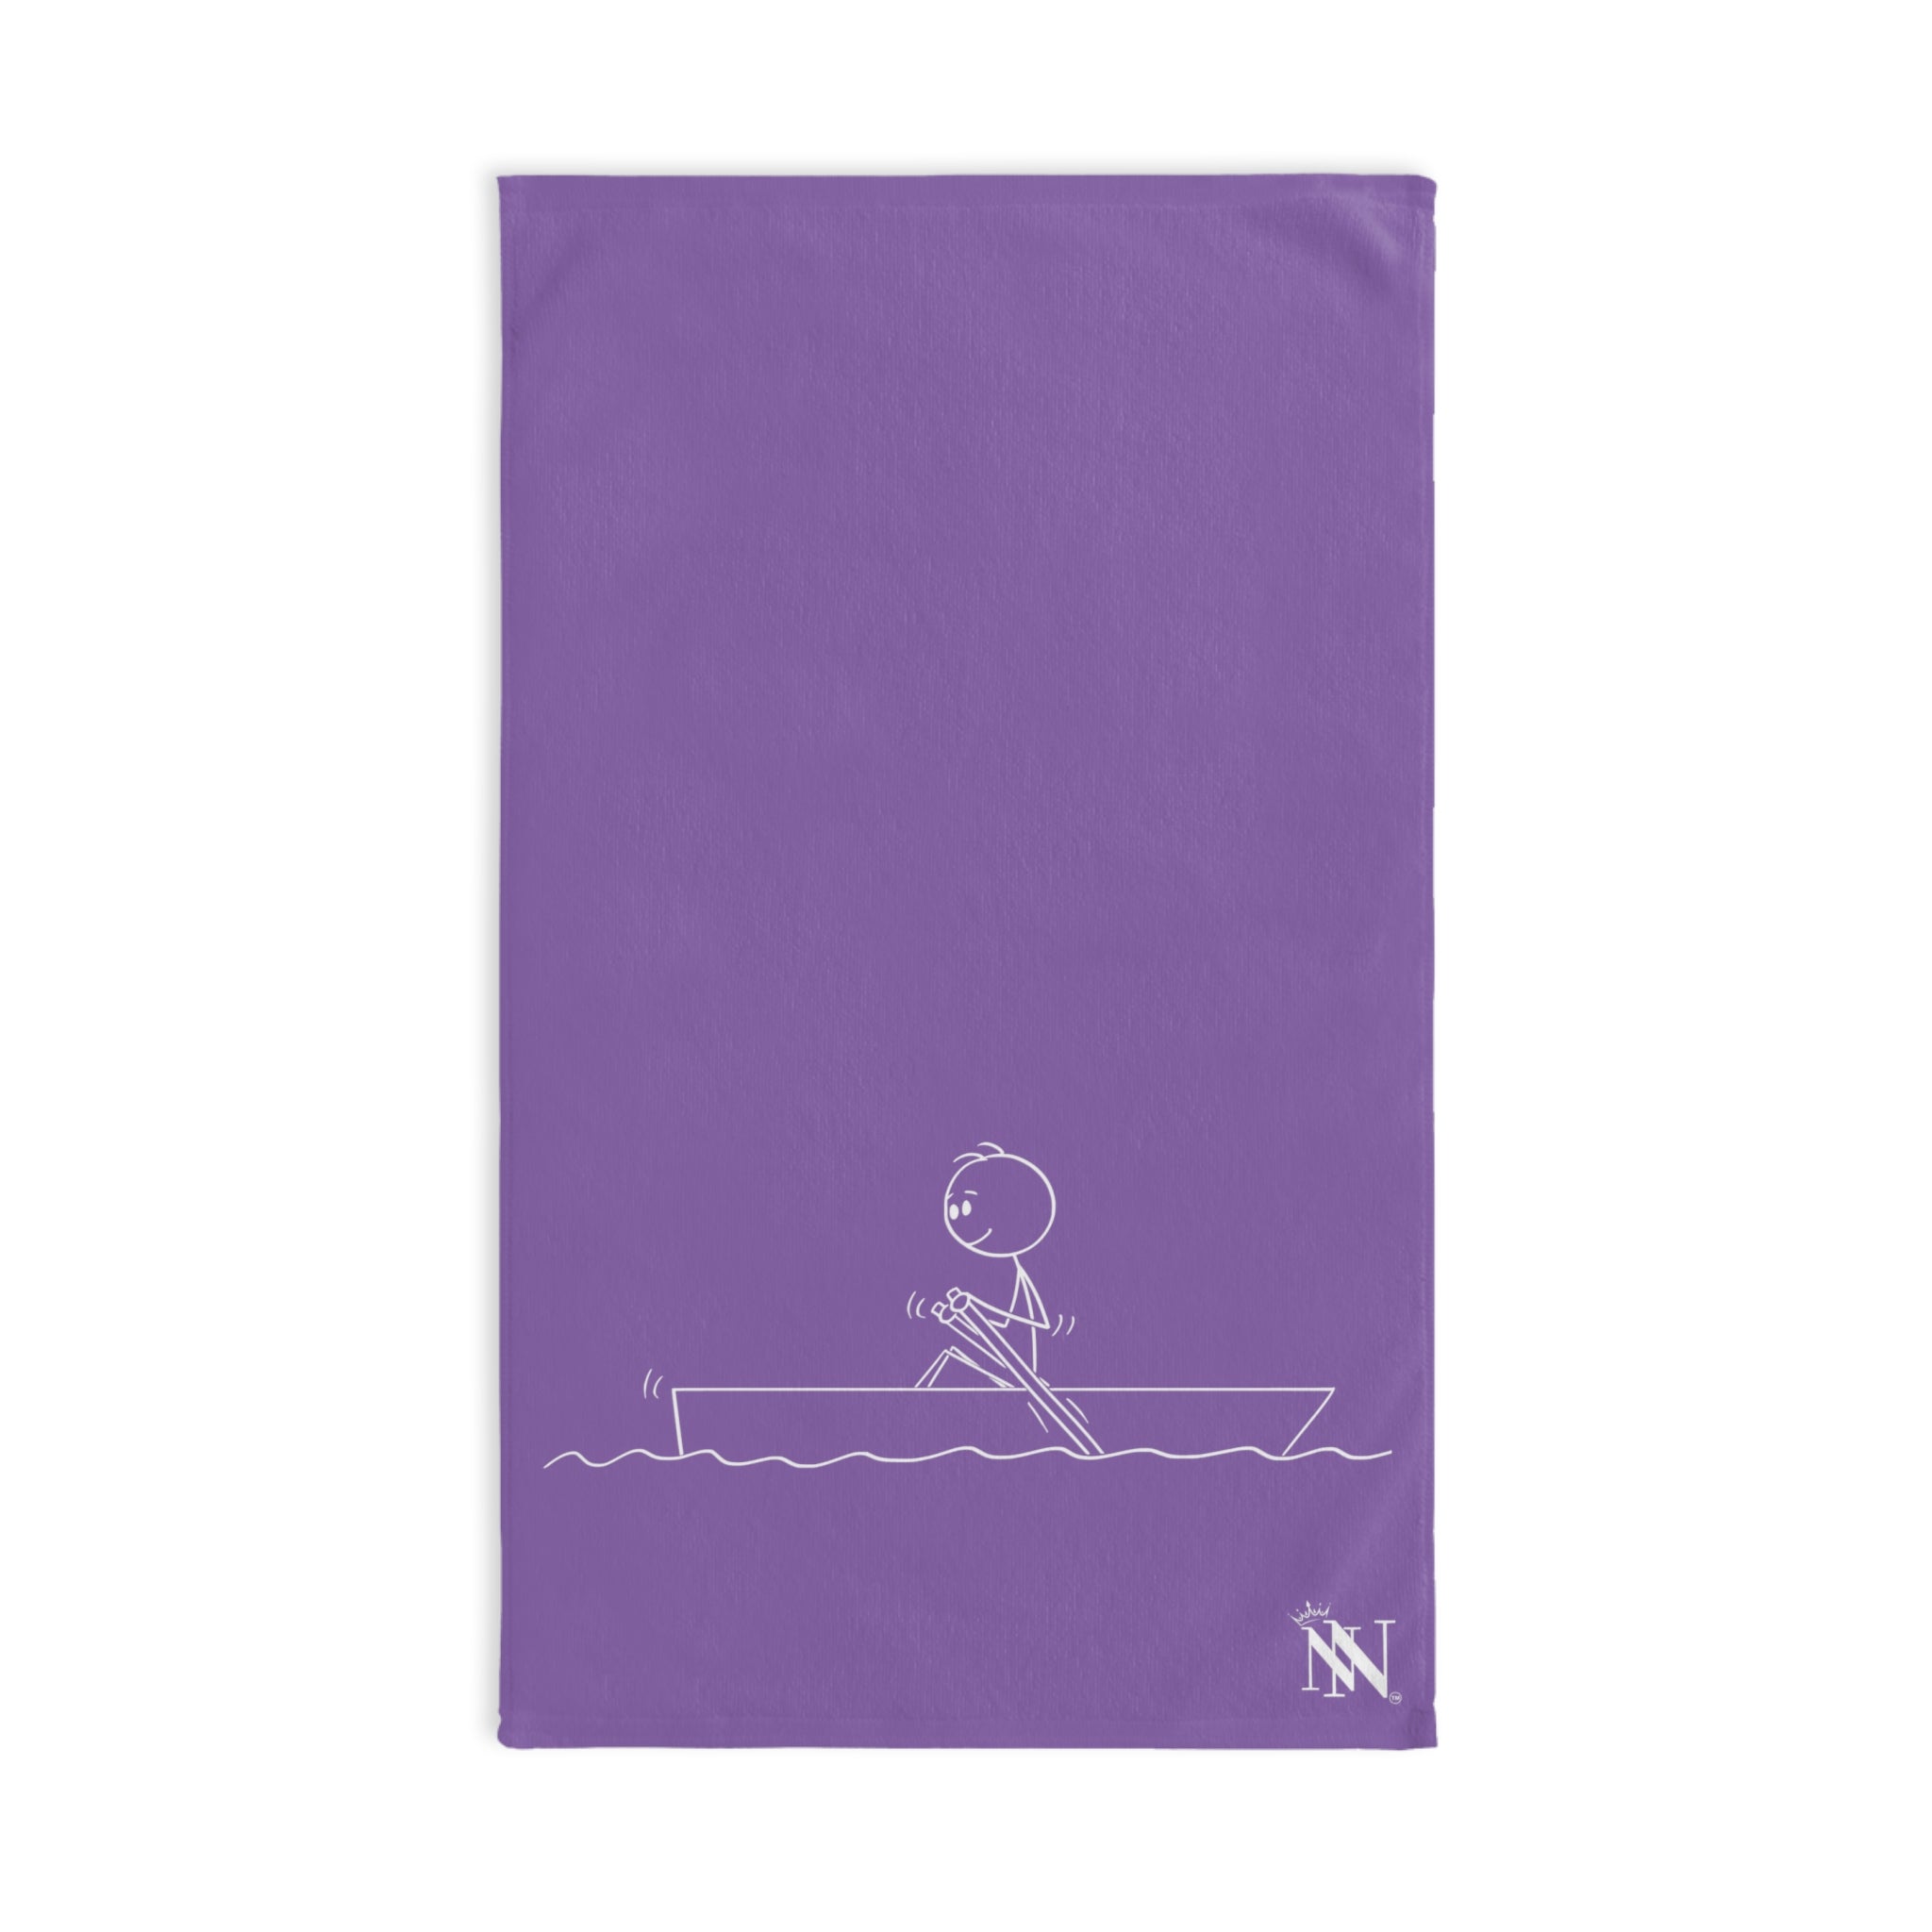 Man Stick in Boat Lavendar | Funny Gifts for Men - Gifts for Him - Birthday Gifts for Men, Him, Husband, Boyfriend, New Couple Gifts, Fathers & Valentines Day Gifts, Hand Towels NECTAR NAPKINS